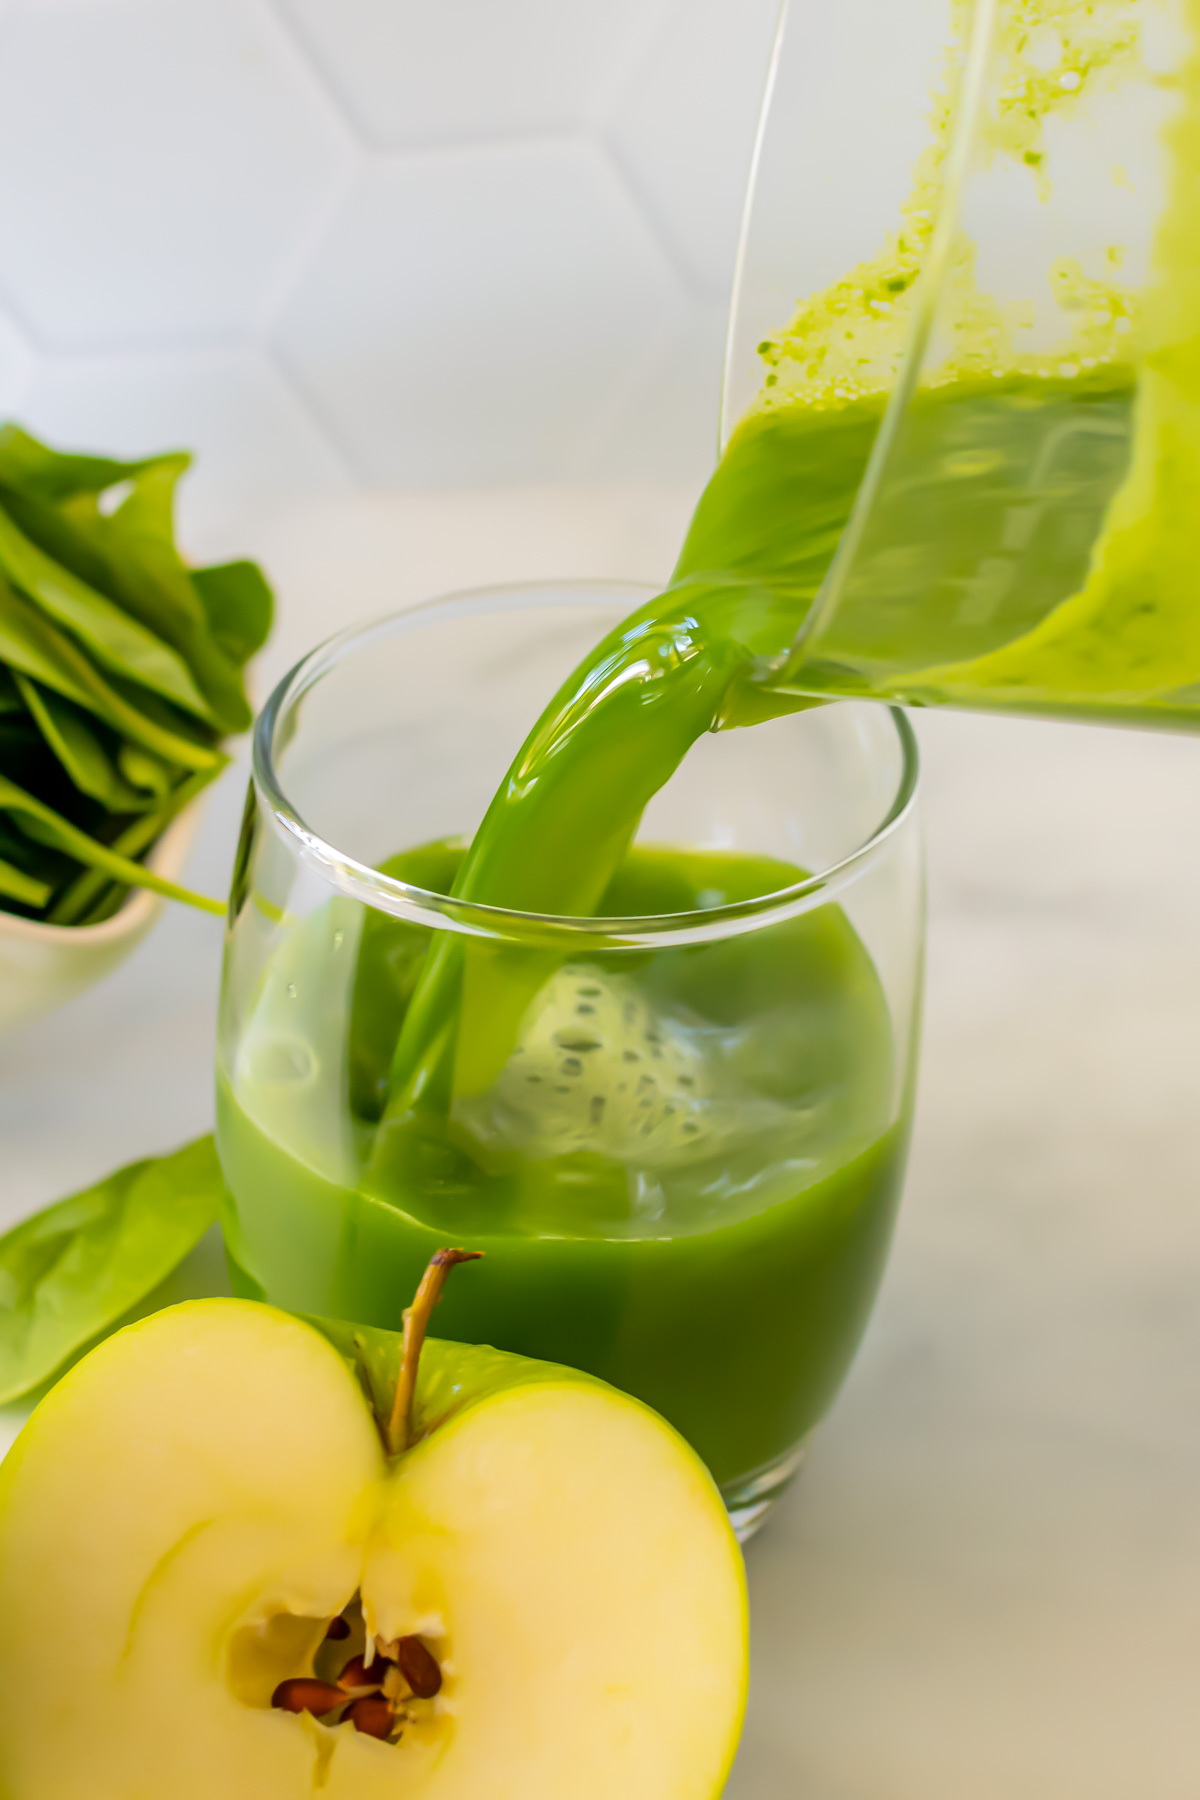 Green juice pouring from a jug into a glass.